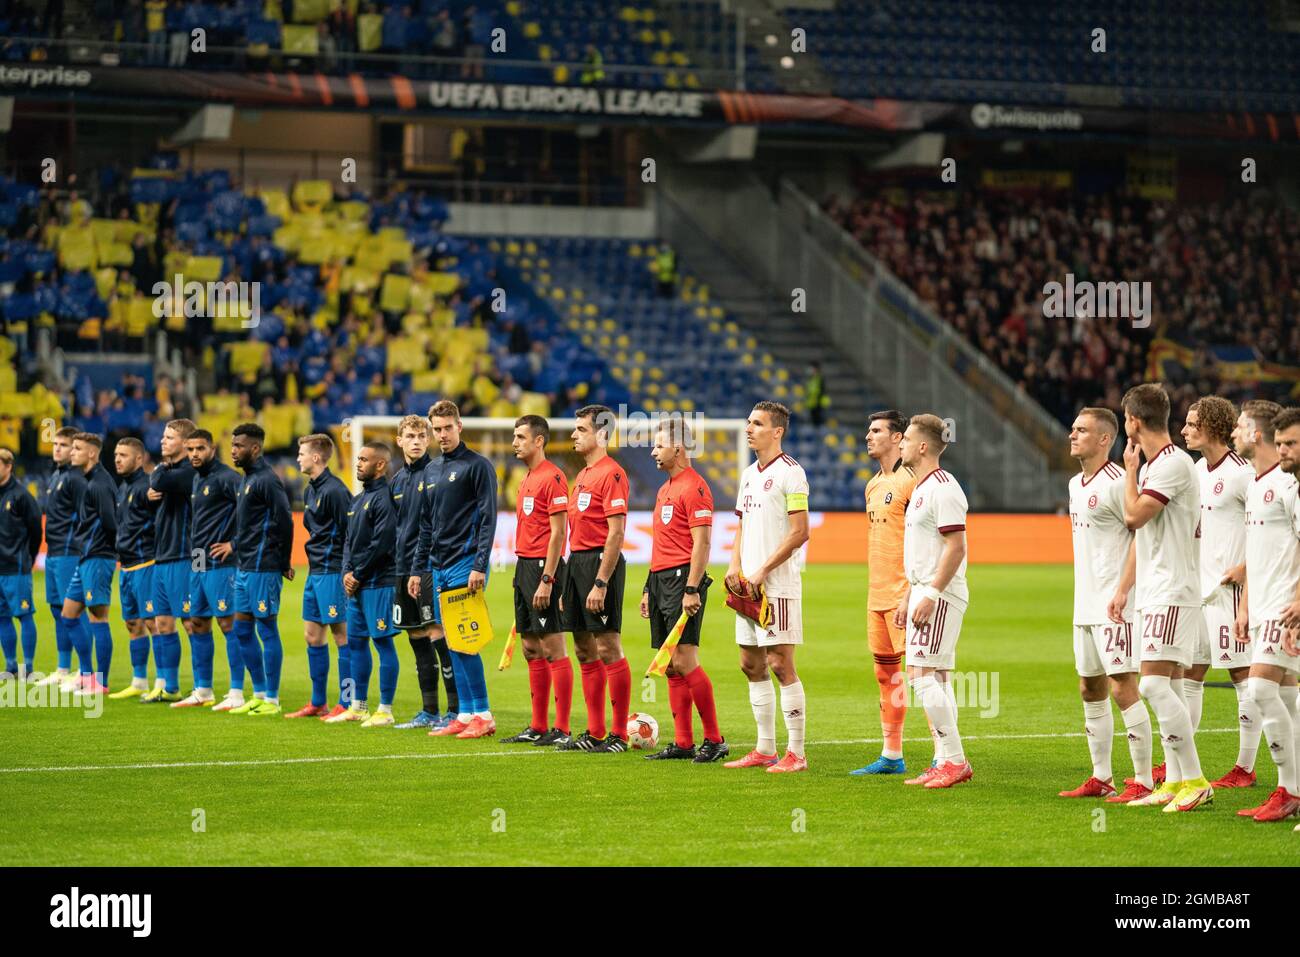 Broendby, Denmark. 16th, September 2021. The players from the two teams line up before the UEFA Europa League match between Broendby IF and Sparta Prague at Broendby Stadion in Broendby. (Photo credit: Gonzales Photo - Gaston Szerman). Stock Photo